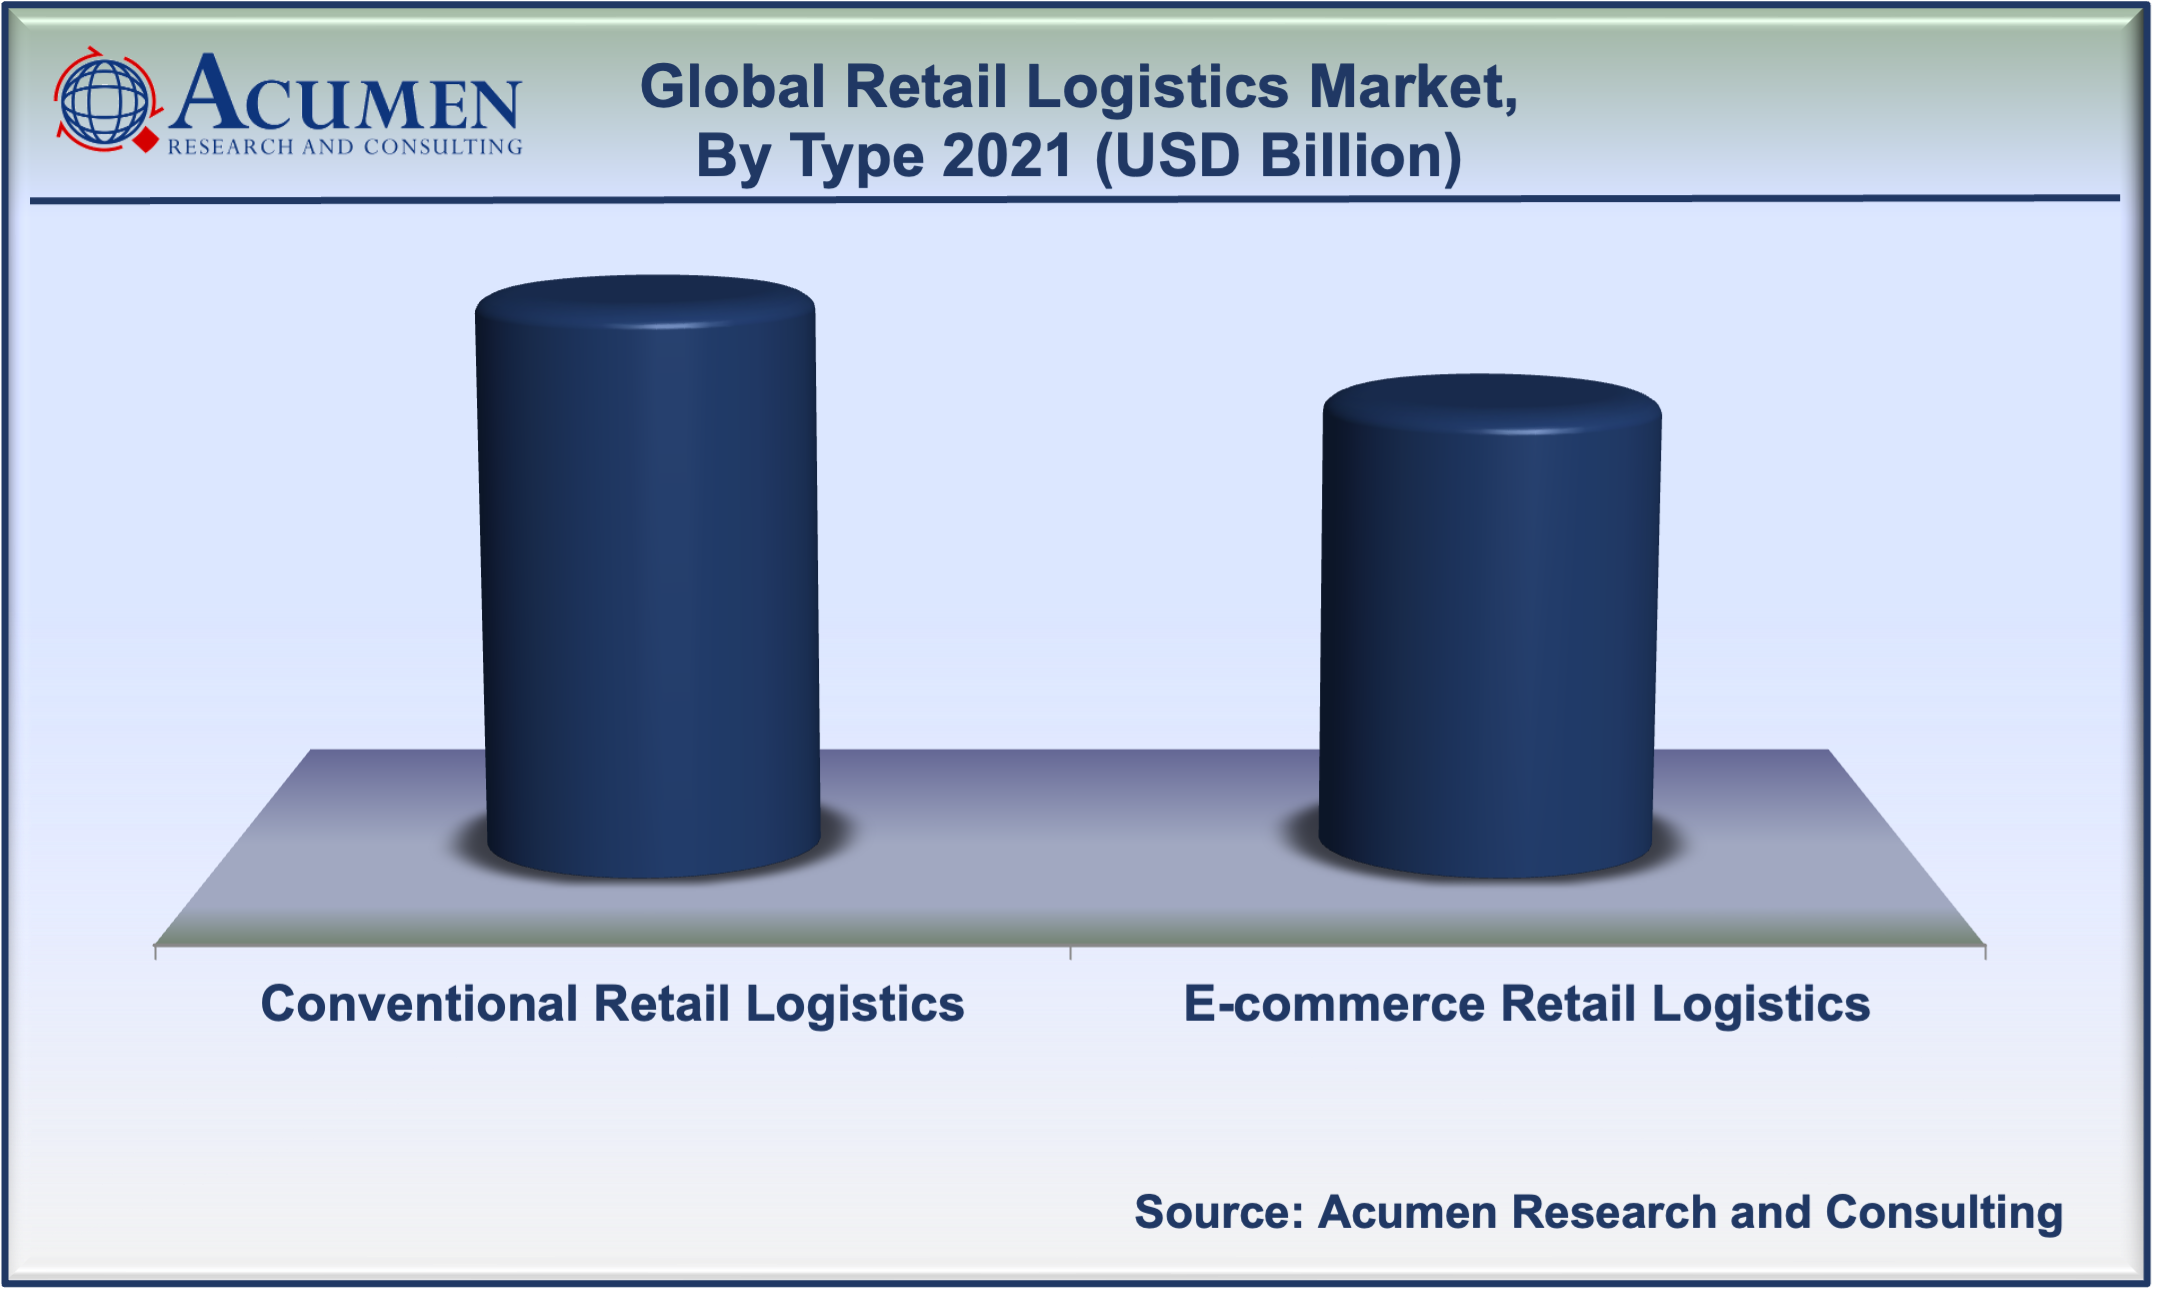 Retail Logistics Market Share accounted for USD 231 Billion in 2021 and is estimated to reach USD 622 Billion by 2030.